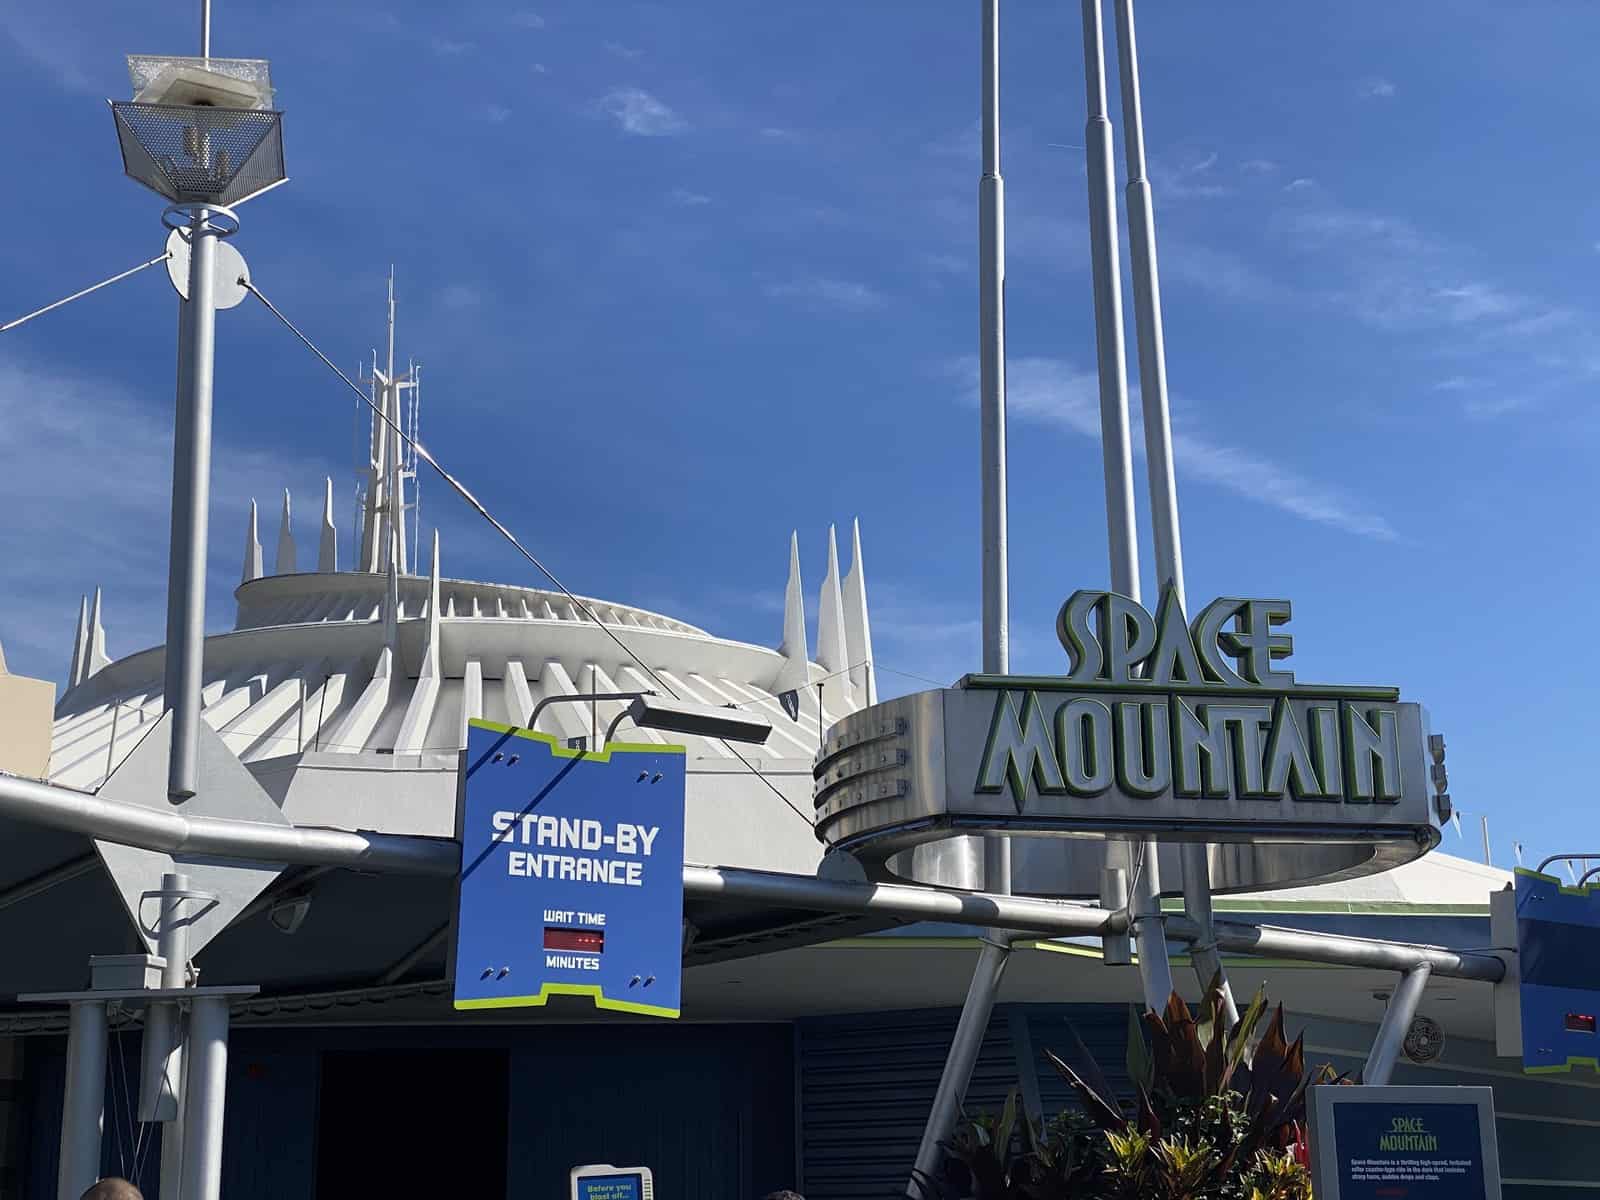 Space Mountain (history, facts, & tips)